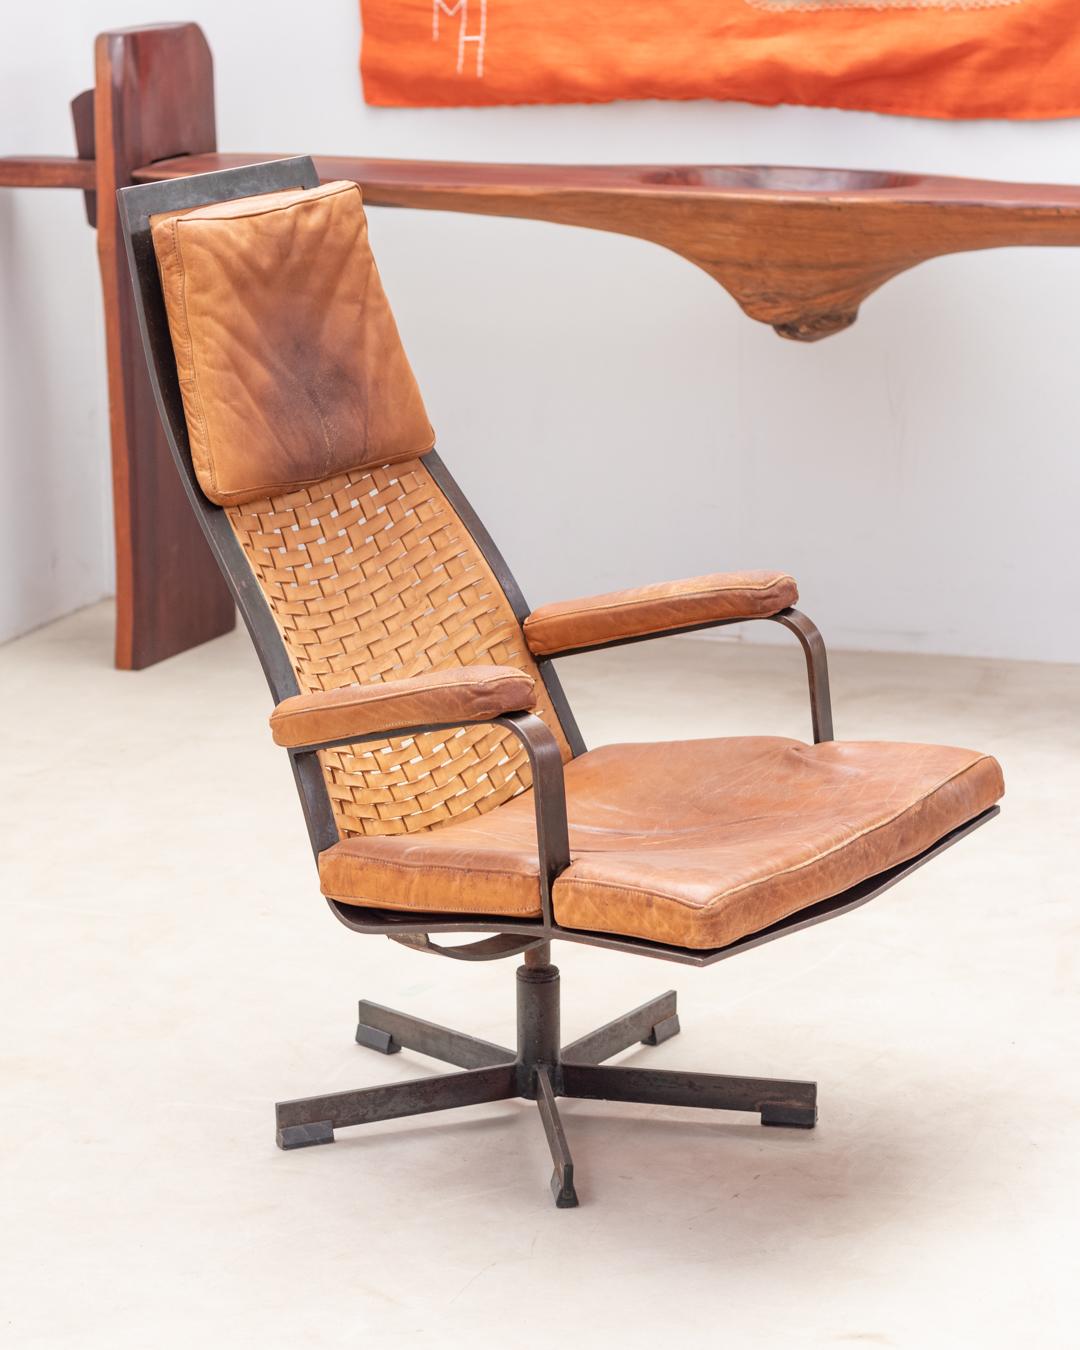 This leather swivel armchair from 1970s’ is a timeless design. 
The frame is crafted from bronze The patina, developed through years of oxidation, lends the bronze frame a distinctive aged charm.  
For the backrest, a light-brown woven leather is